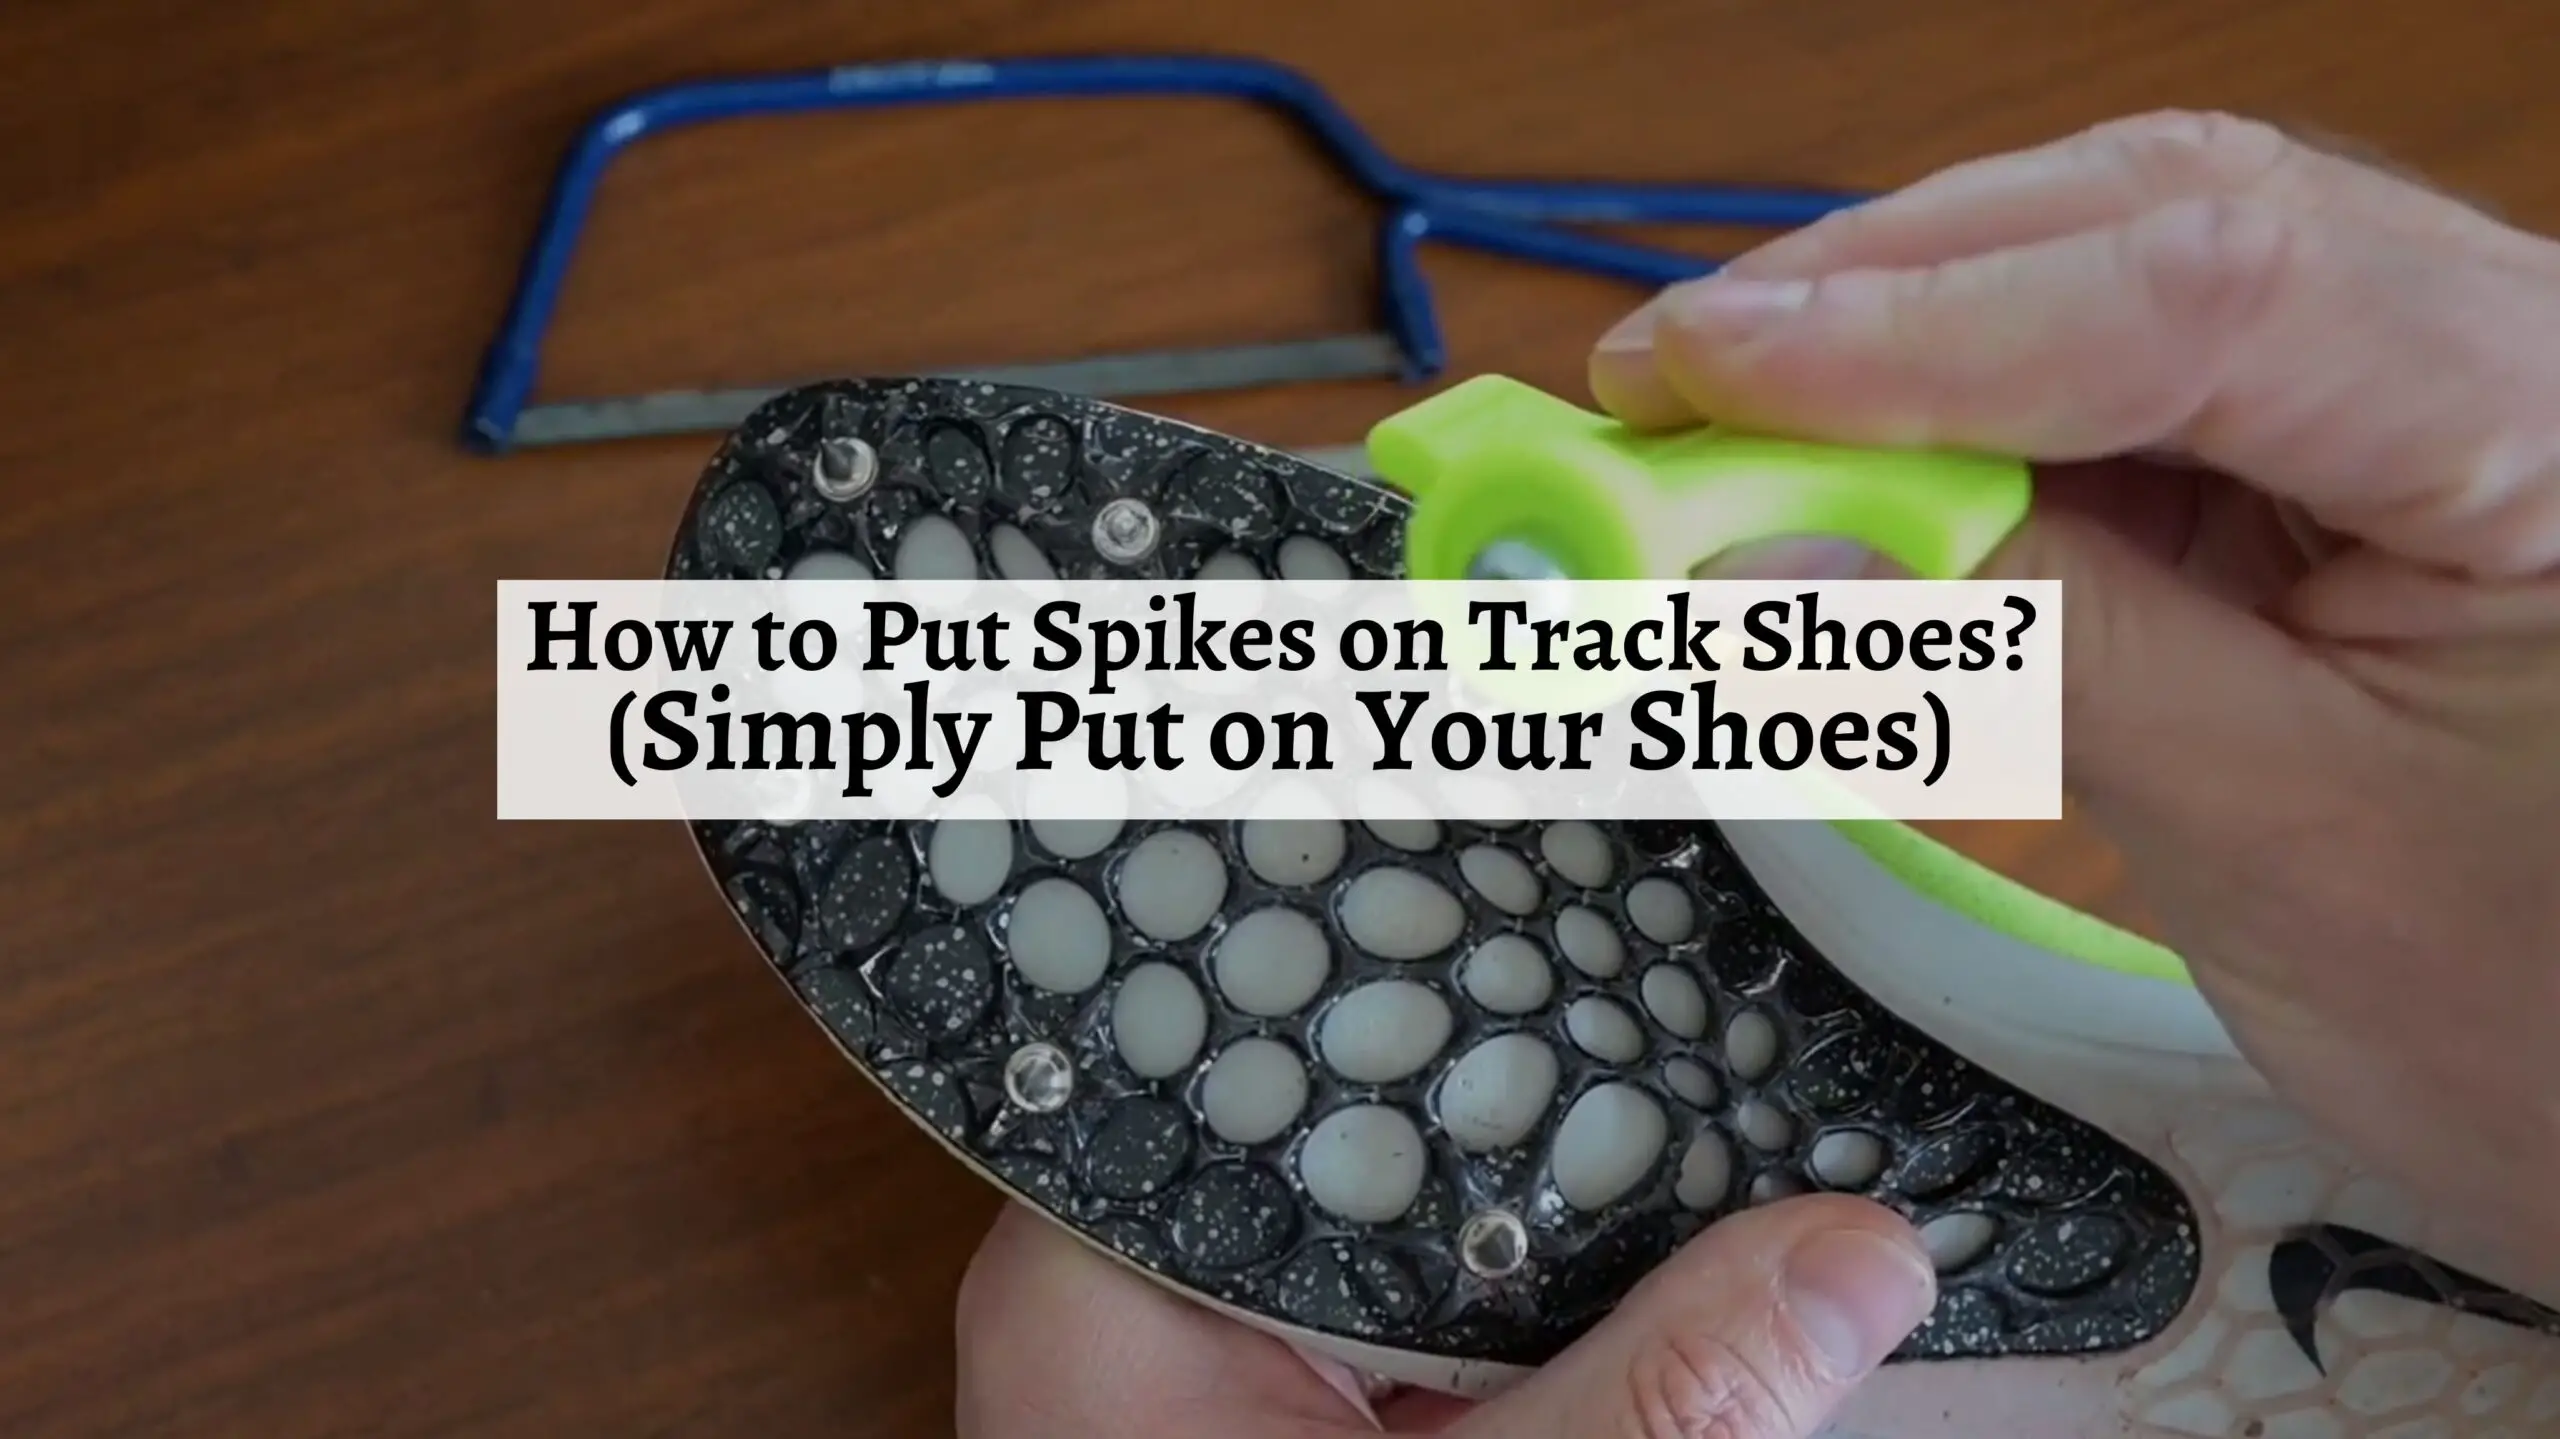 How to Put Spikes on Track Shoes? (Simply Put on Your Shoes) - Shoe Filter